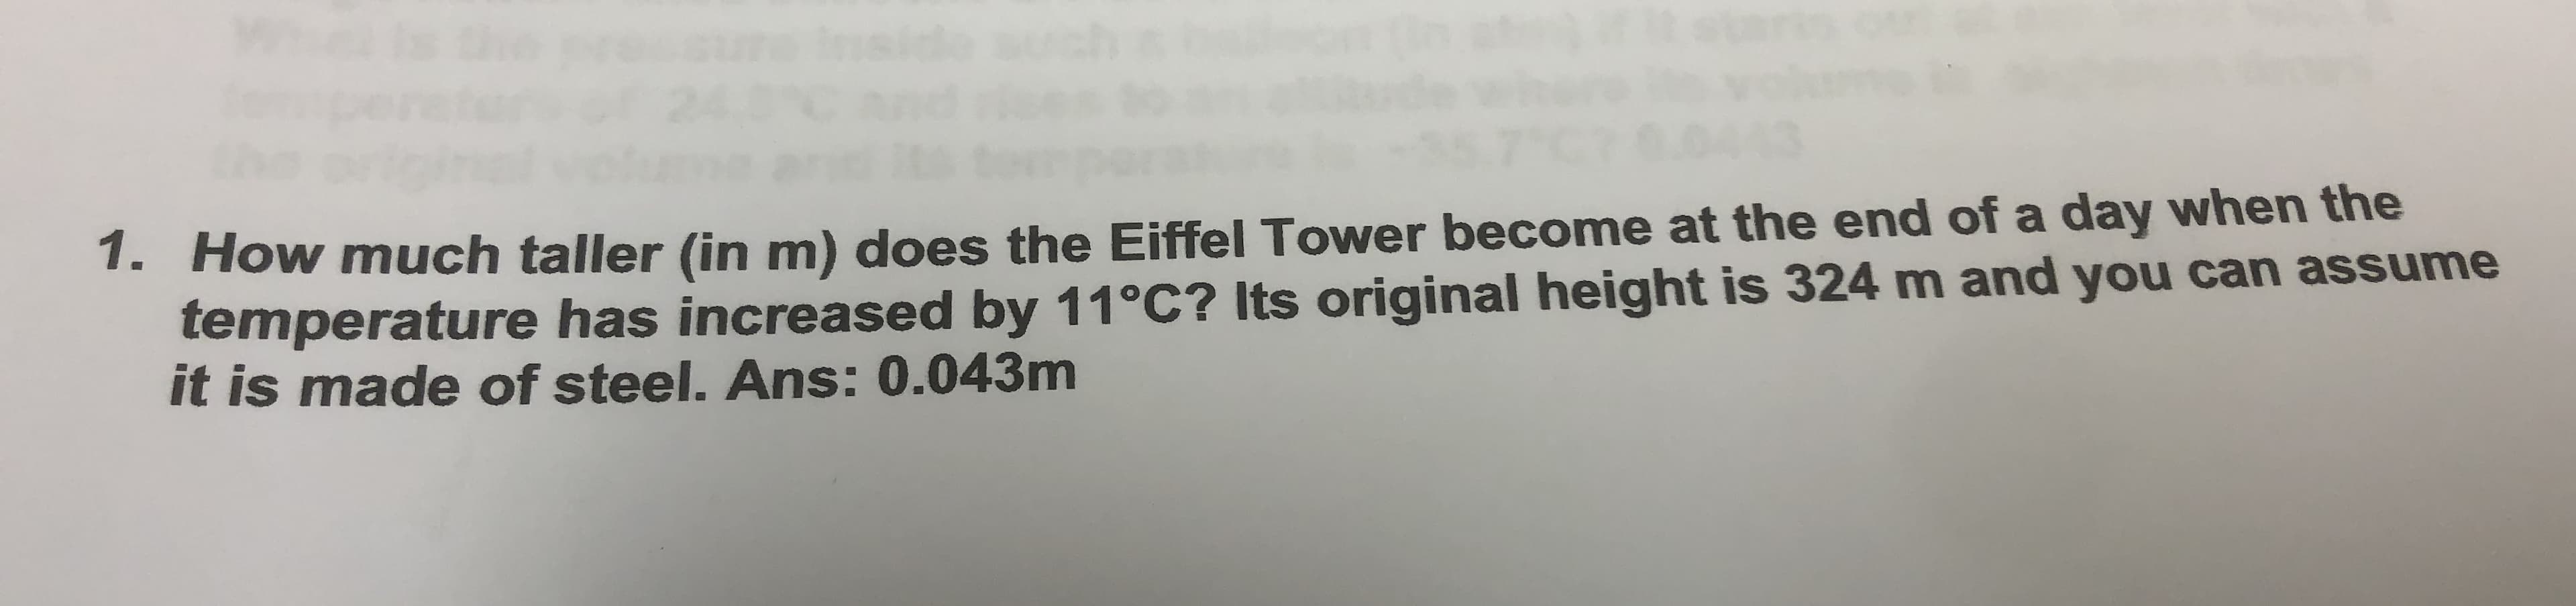 Inside
1. How much taller (in m) does the Eiffel Tower become at the end of a day when the
temperature has increased by 11°C? Its original height is 324 m and you can assume
it is made of steel. Ans: 0.043m
